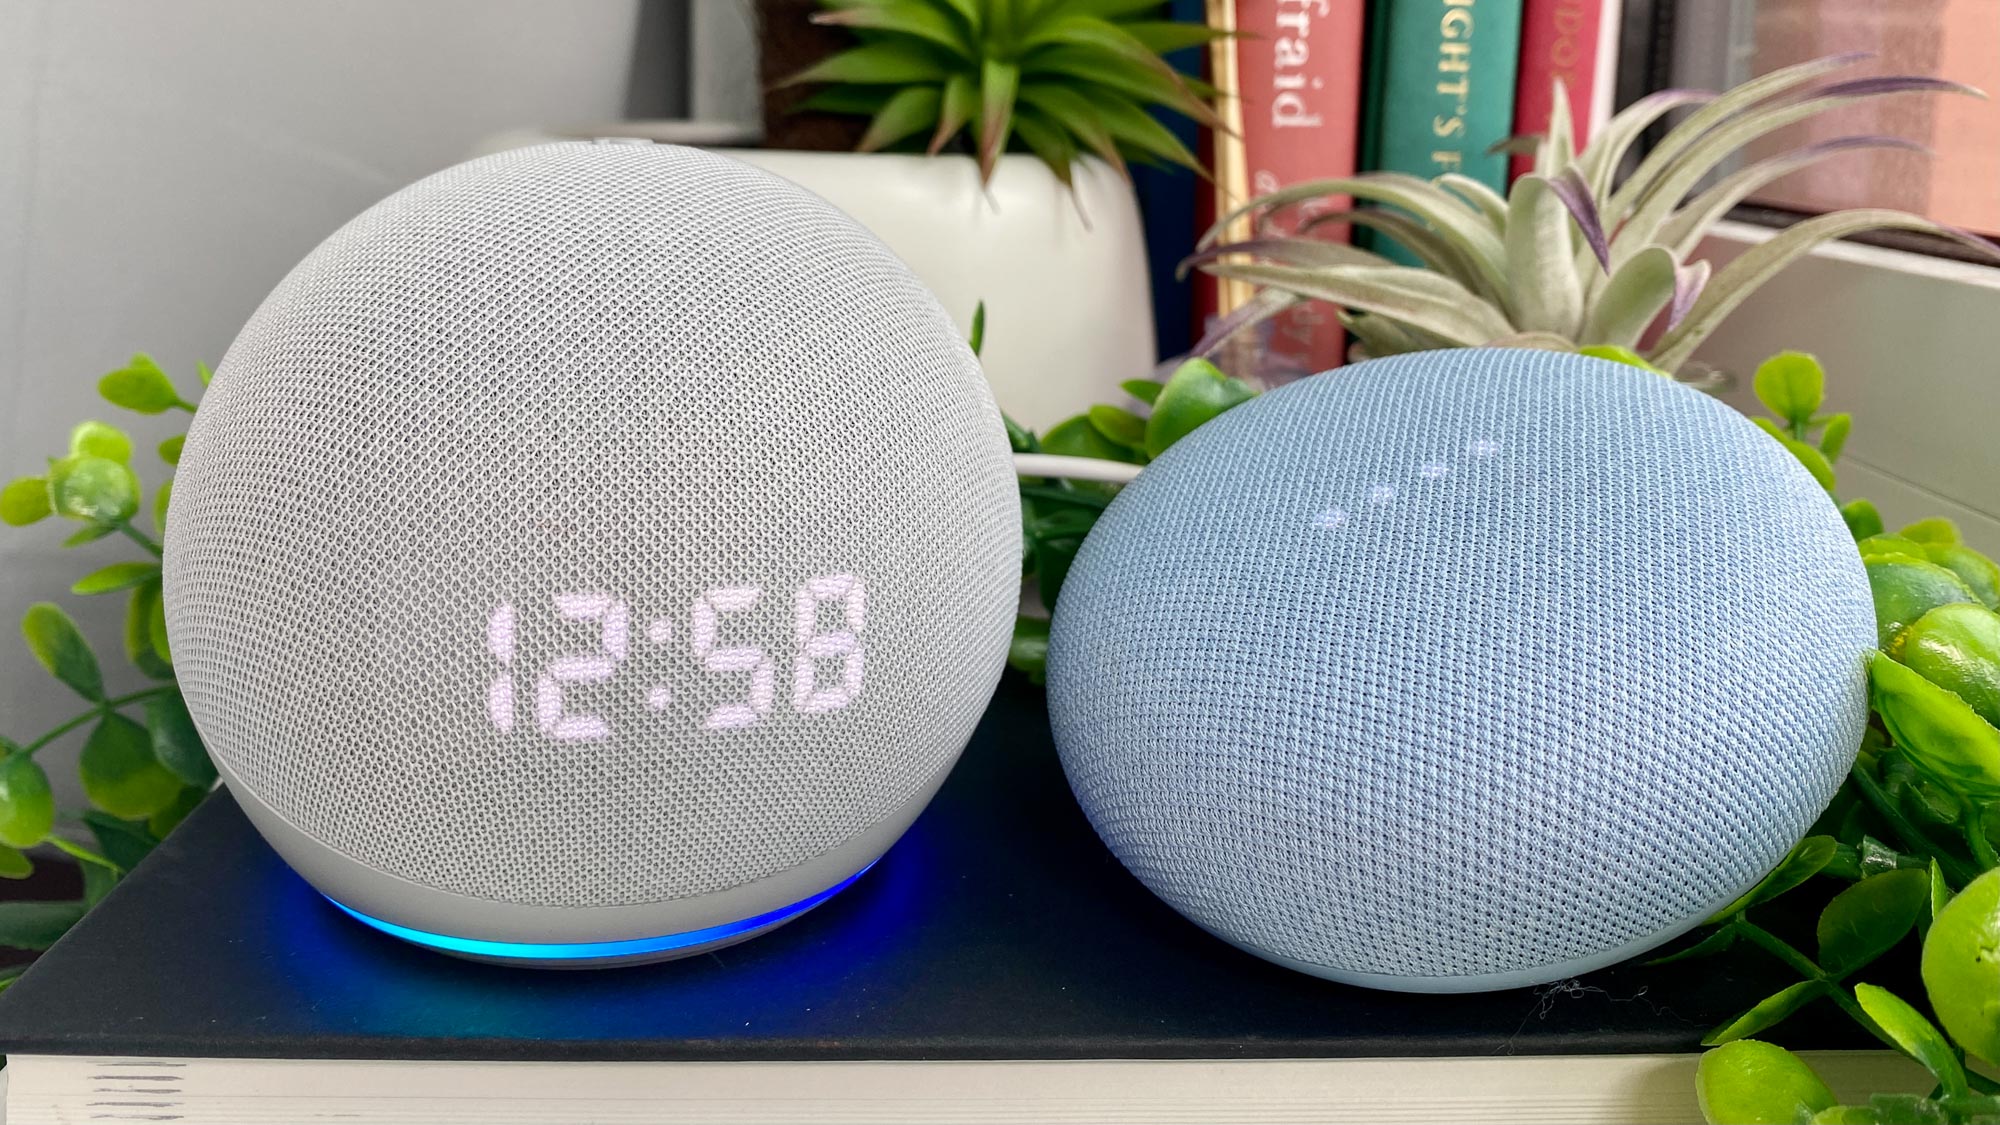 8 Reasons To Avoid A New Smart Home Assistant (E.G.  Echo